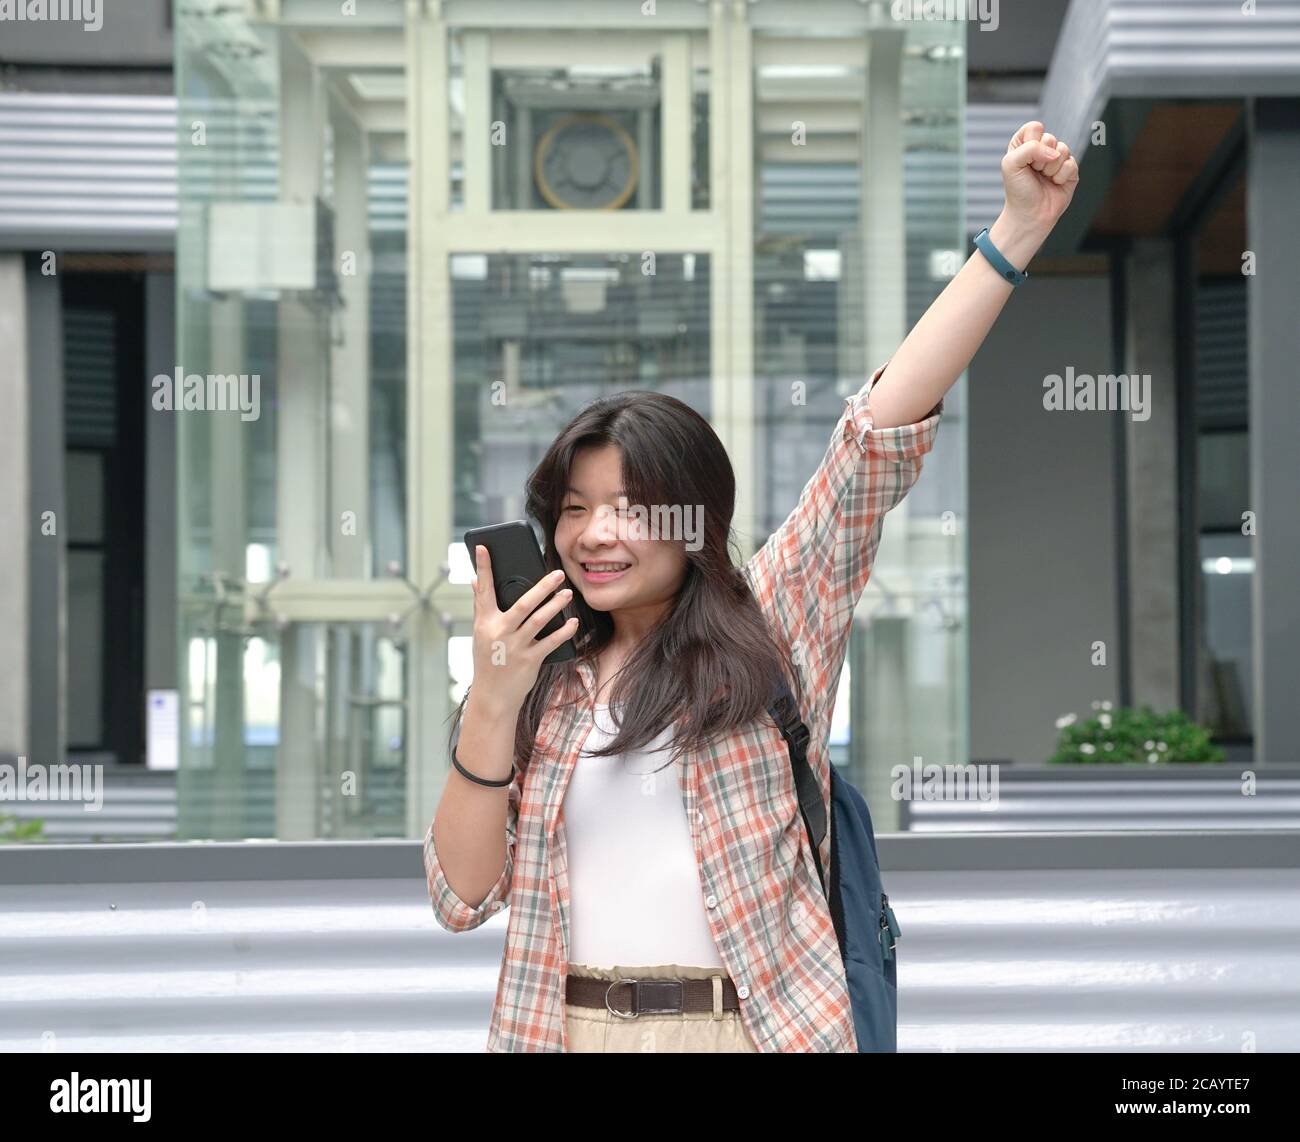 Asian woman react with joy by smiling happily and raising her hand while looking at her cellphone. Stock Photo